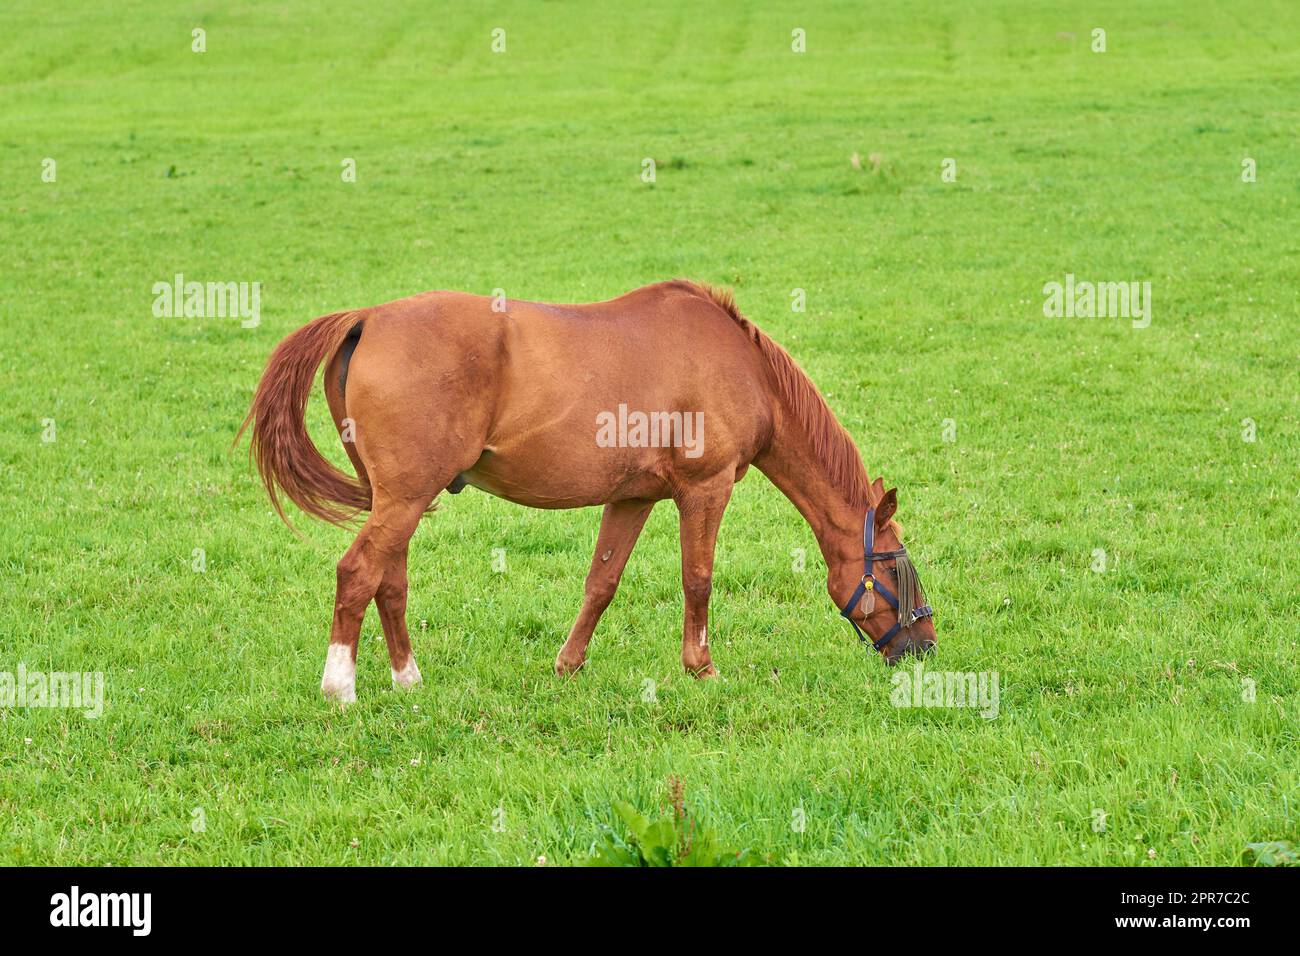 Small brown horse eating green grass alone from a field outdoors with copyspace on sunny day. Cute chestnut pony roaming freely on a pasture in the rural countryside. Foal being raised as a racehorse Stock Photo